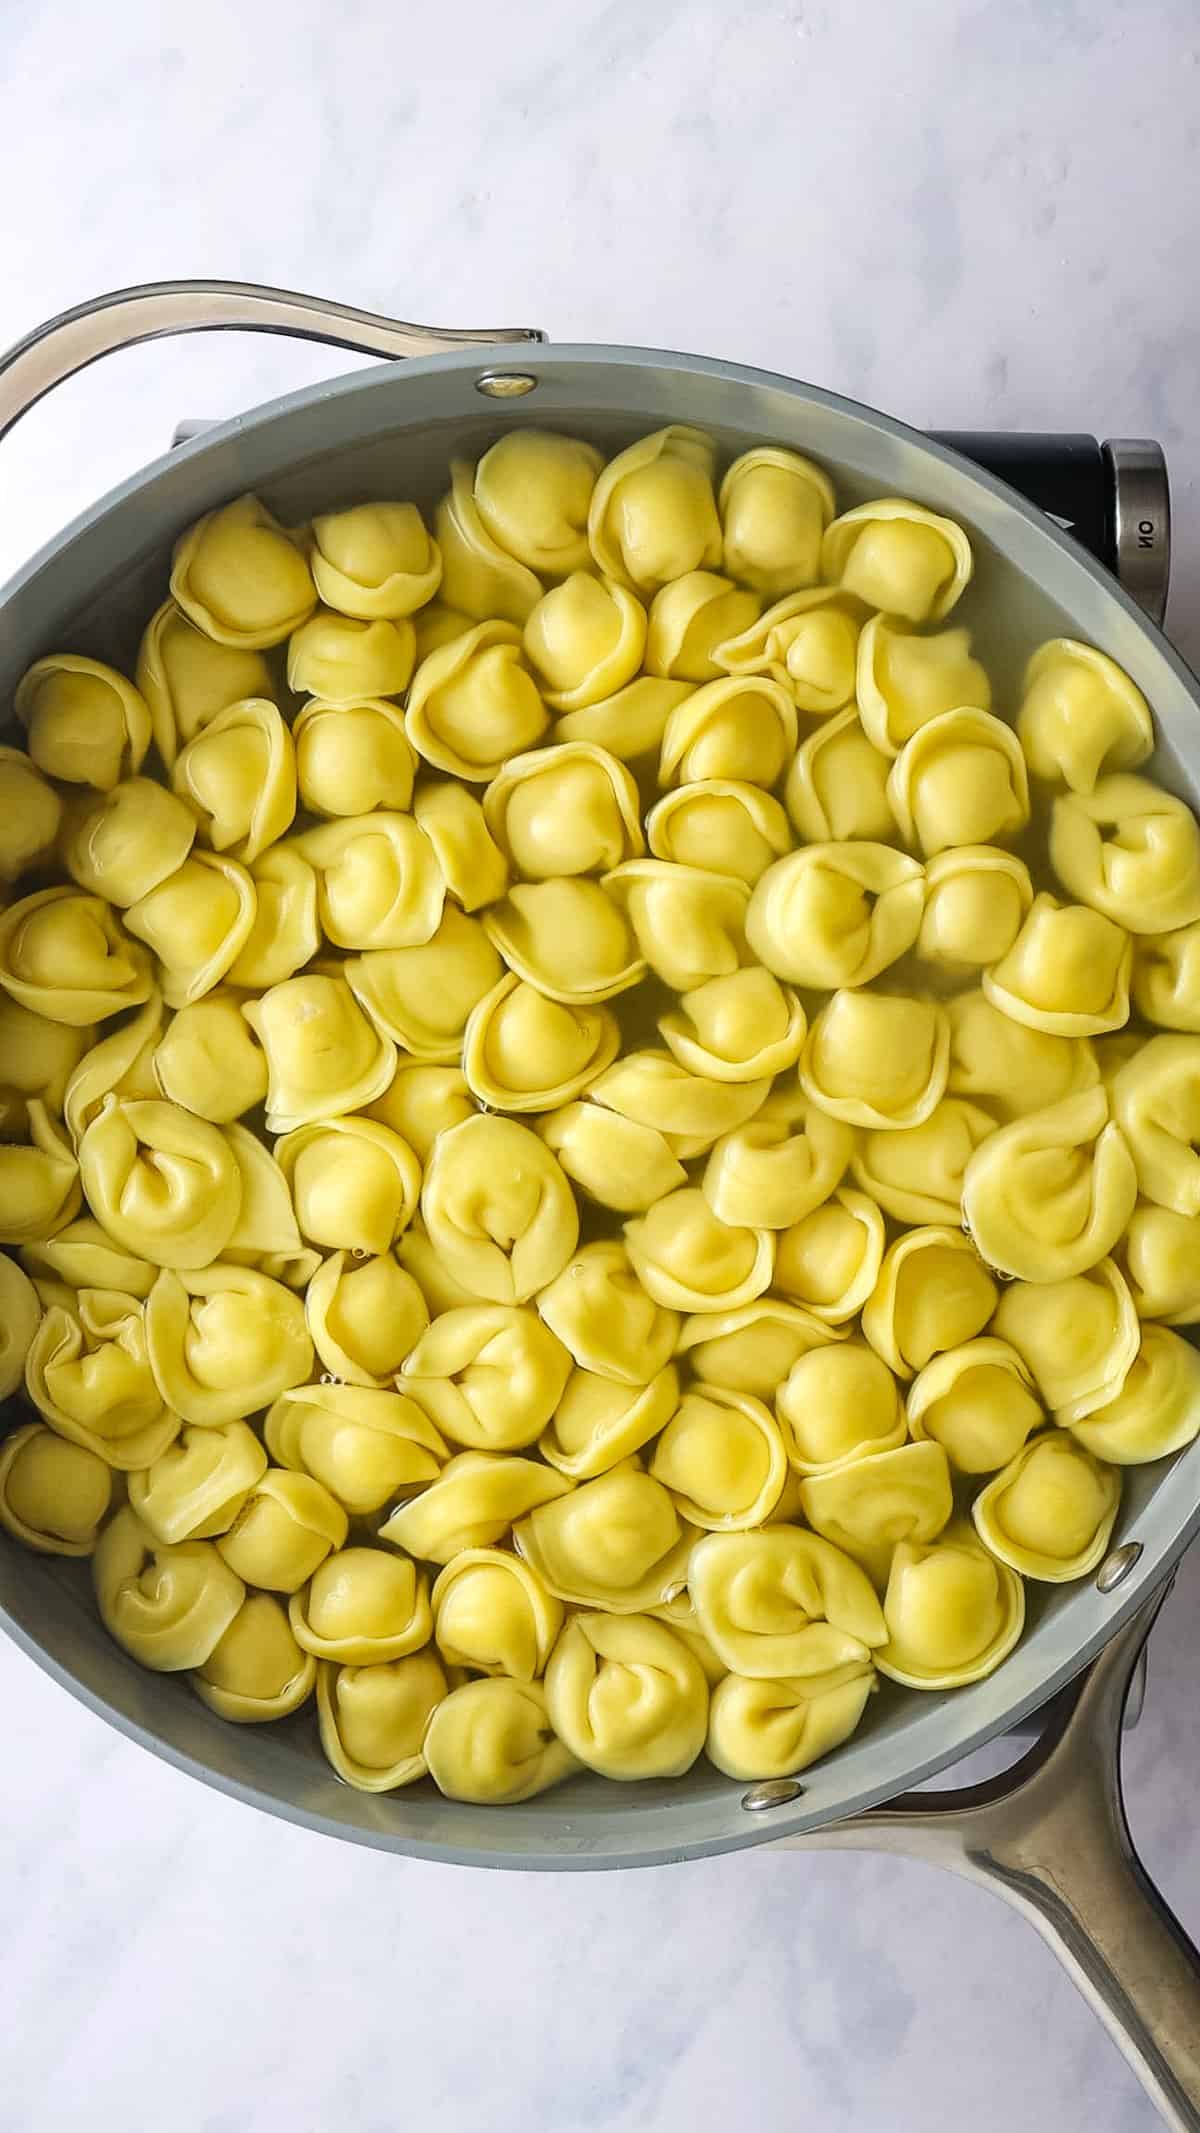 Overhead view showing tortellini cooking in a large skillet.